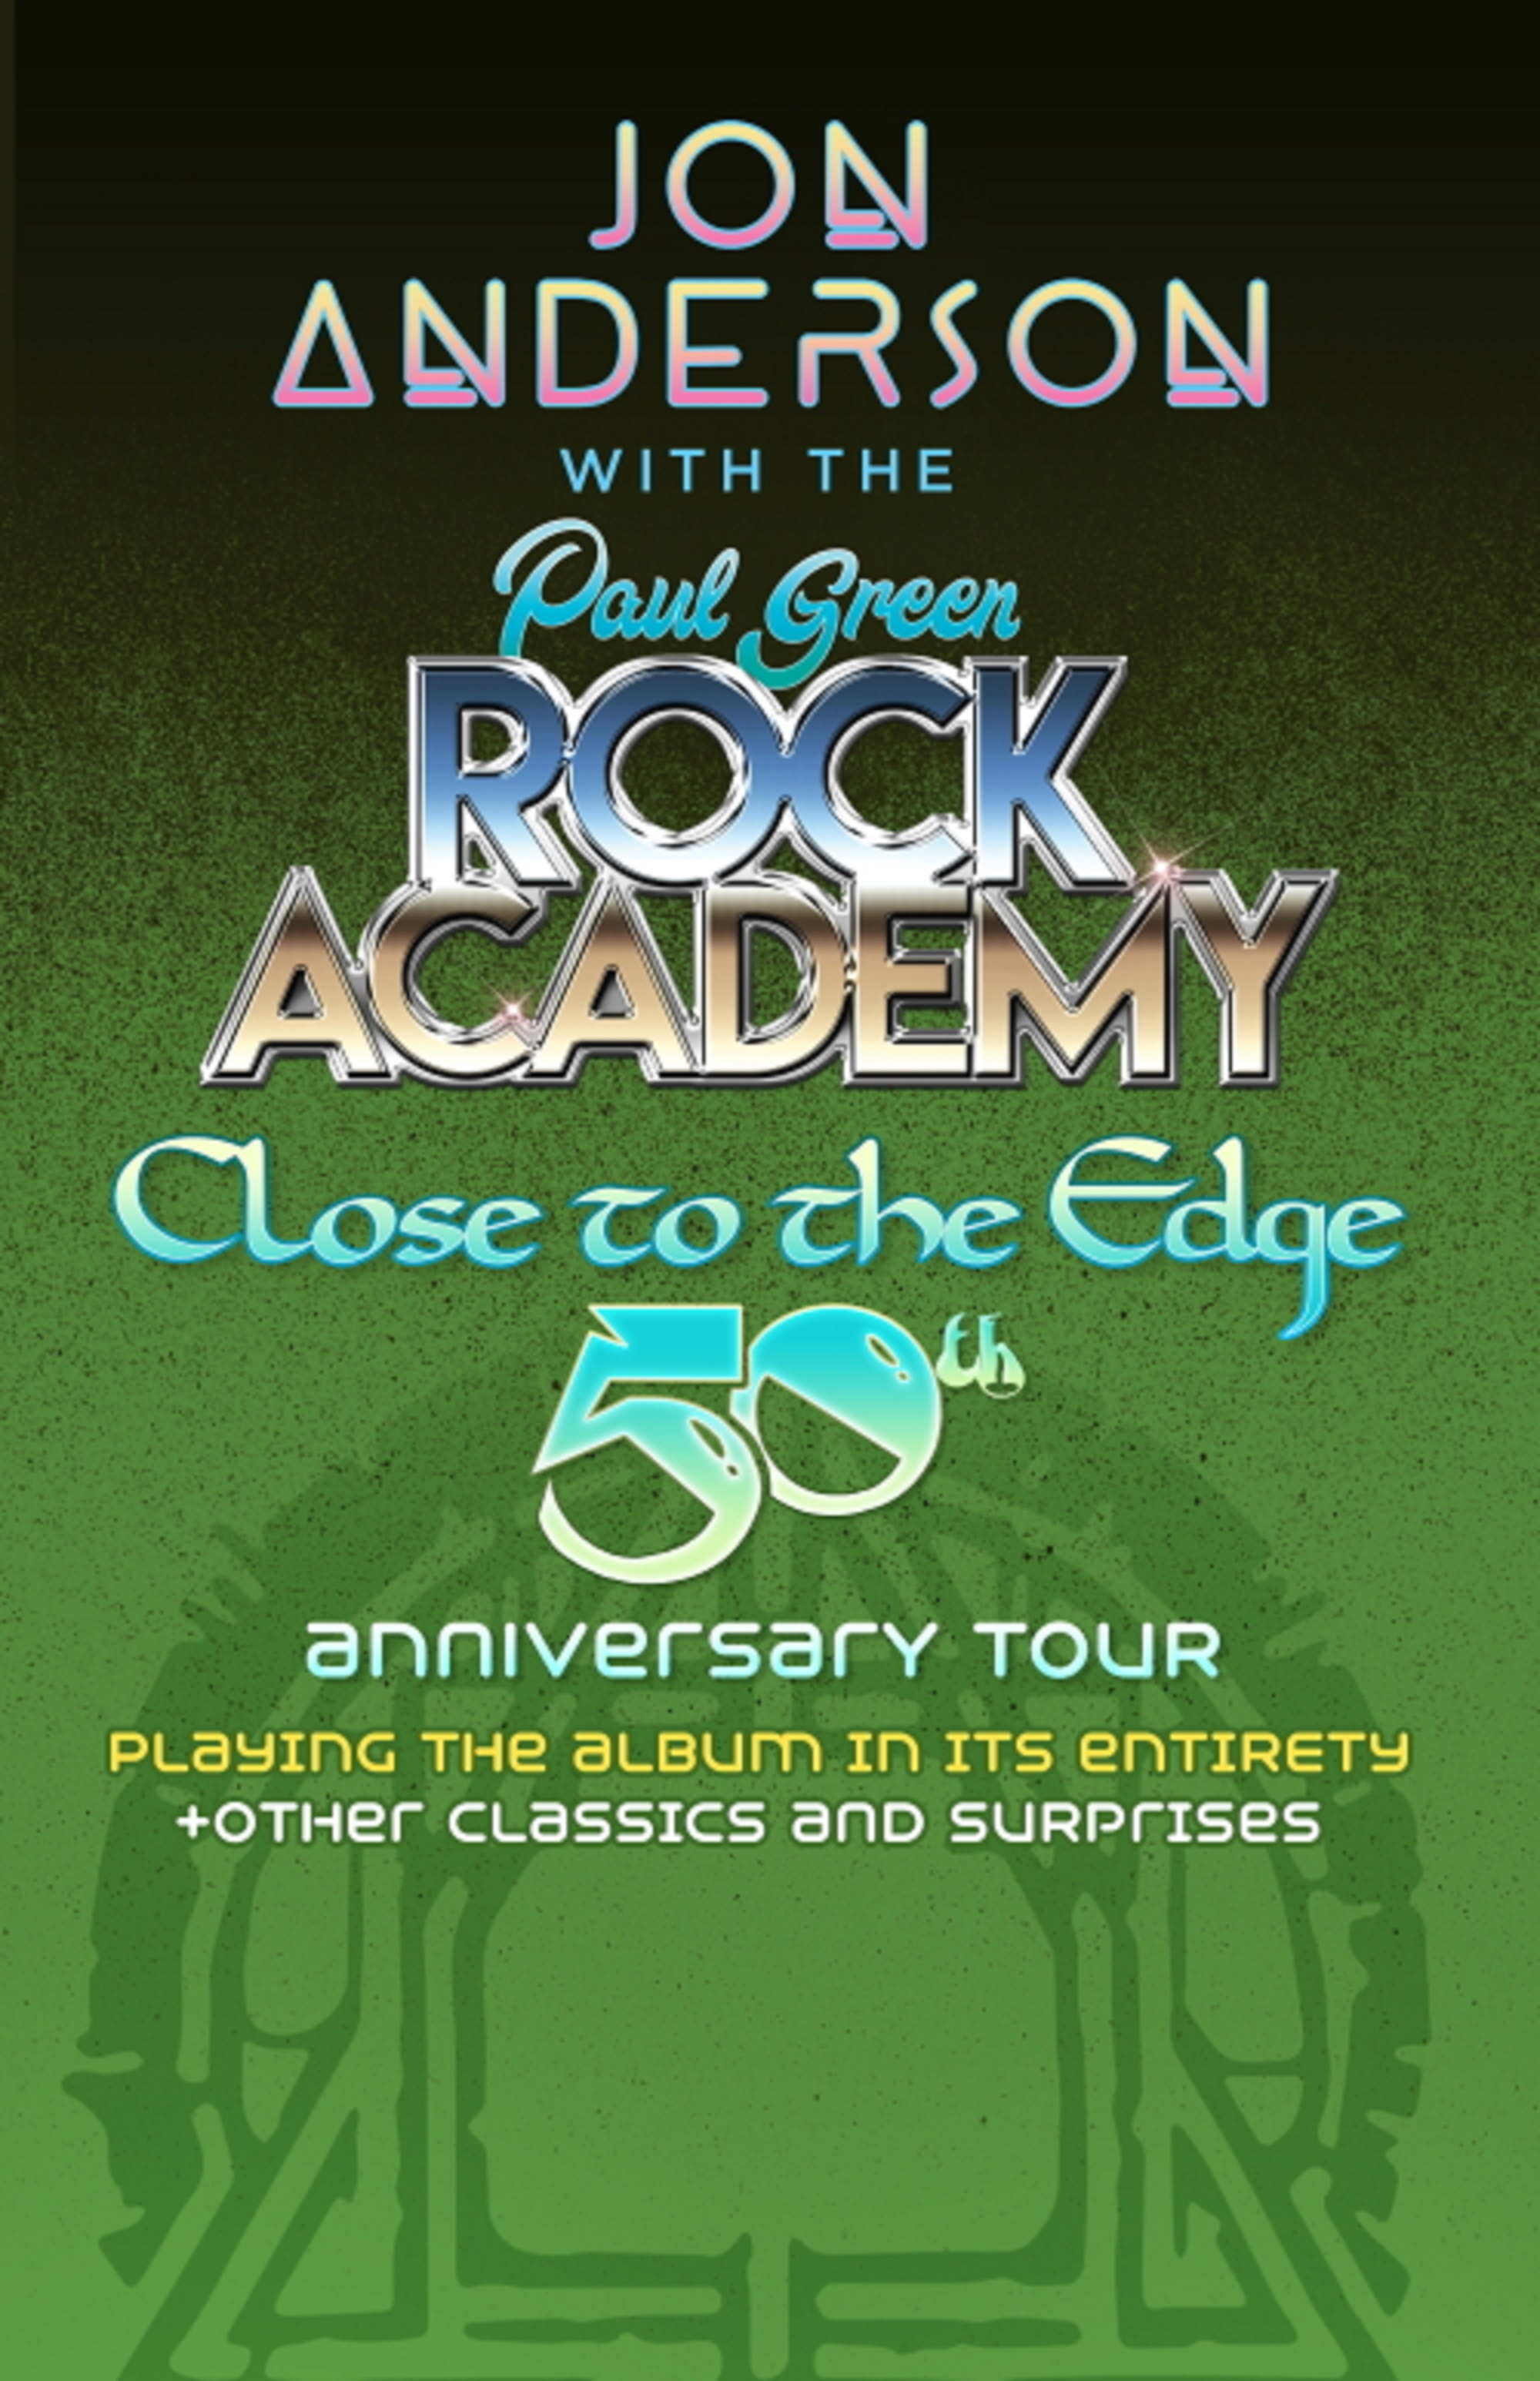 YES Legend Jon Anderson w/ The Paul Green Rock Academy To Launch “Close to the Edge” 50th Anniversary Summer Tour 2022!